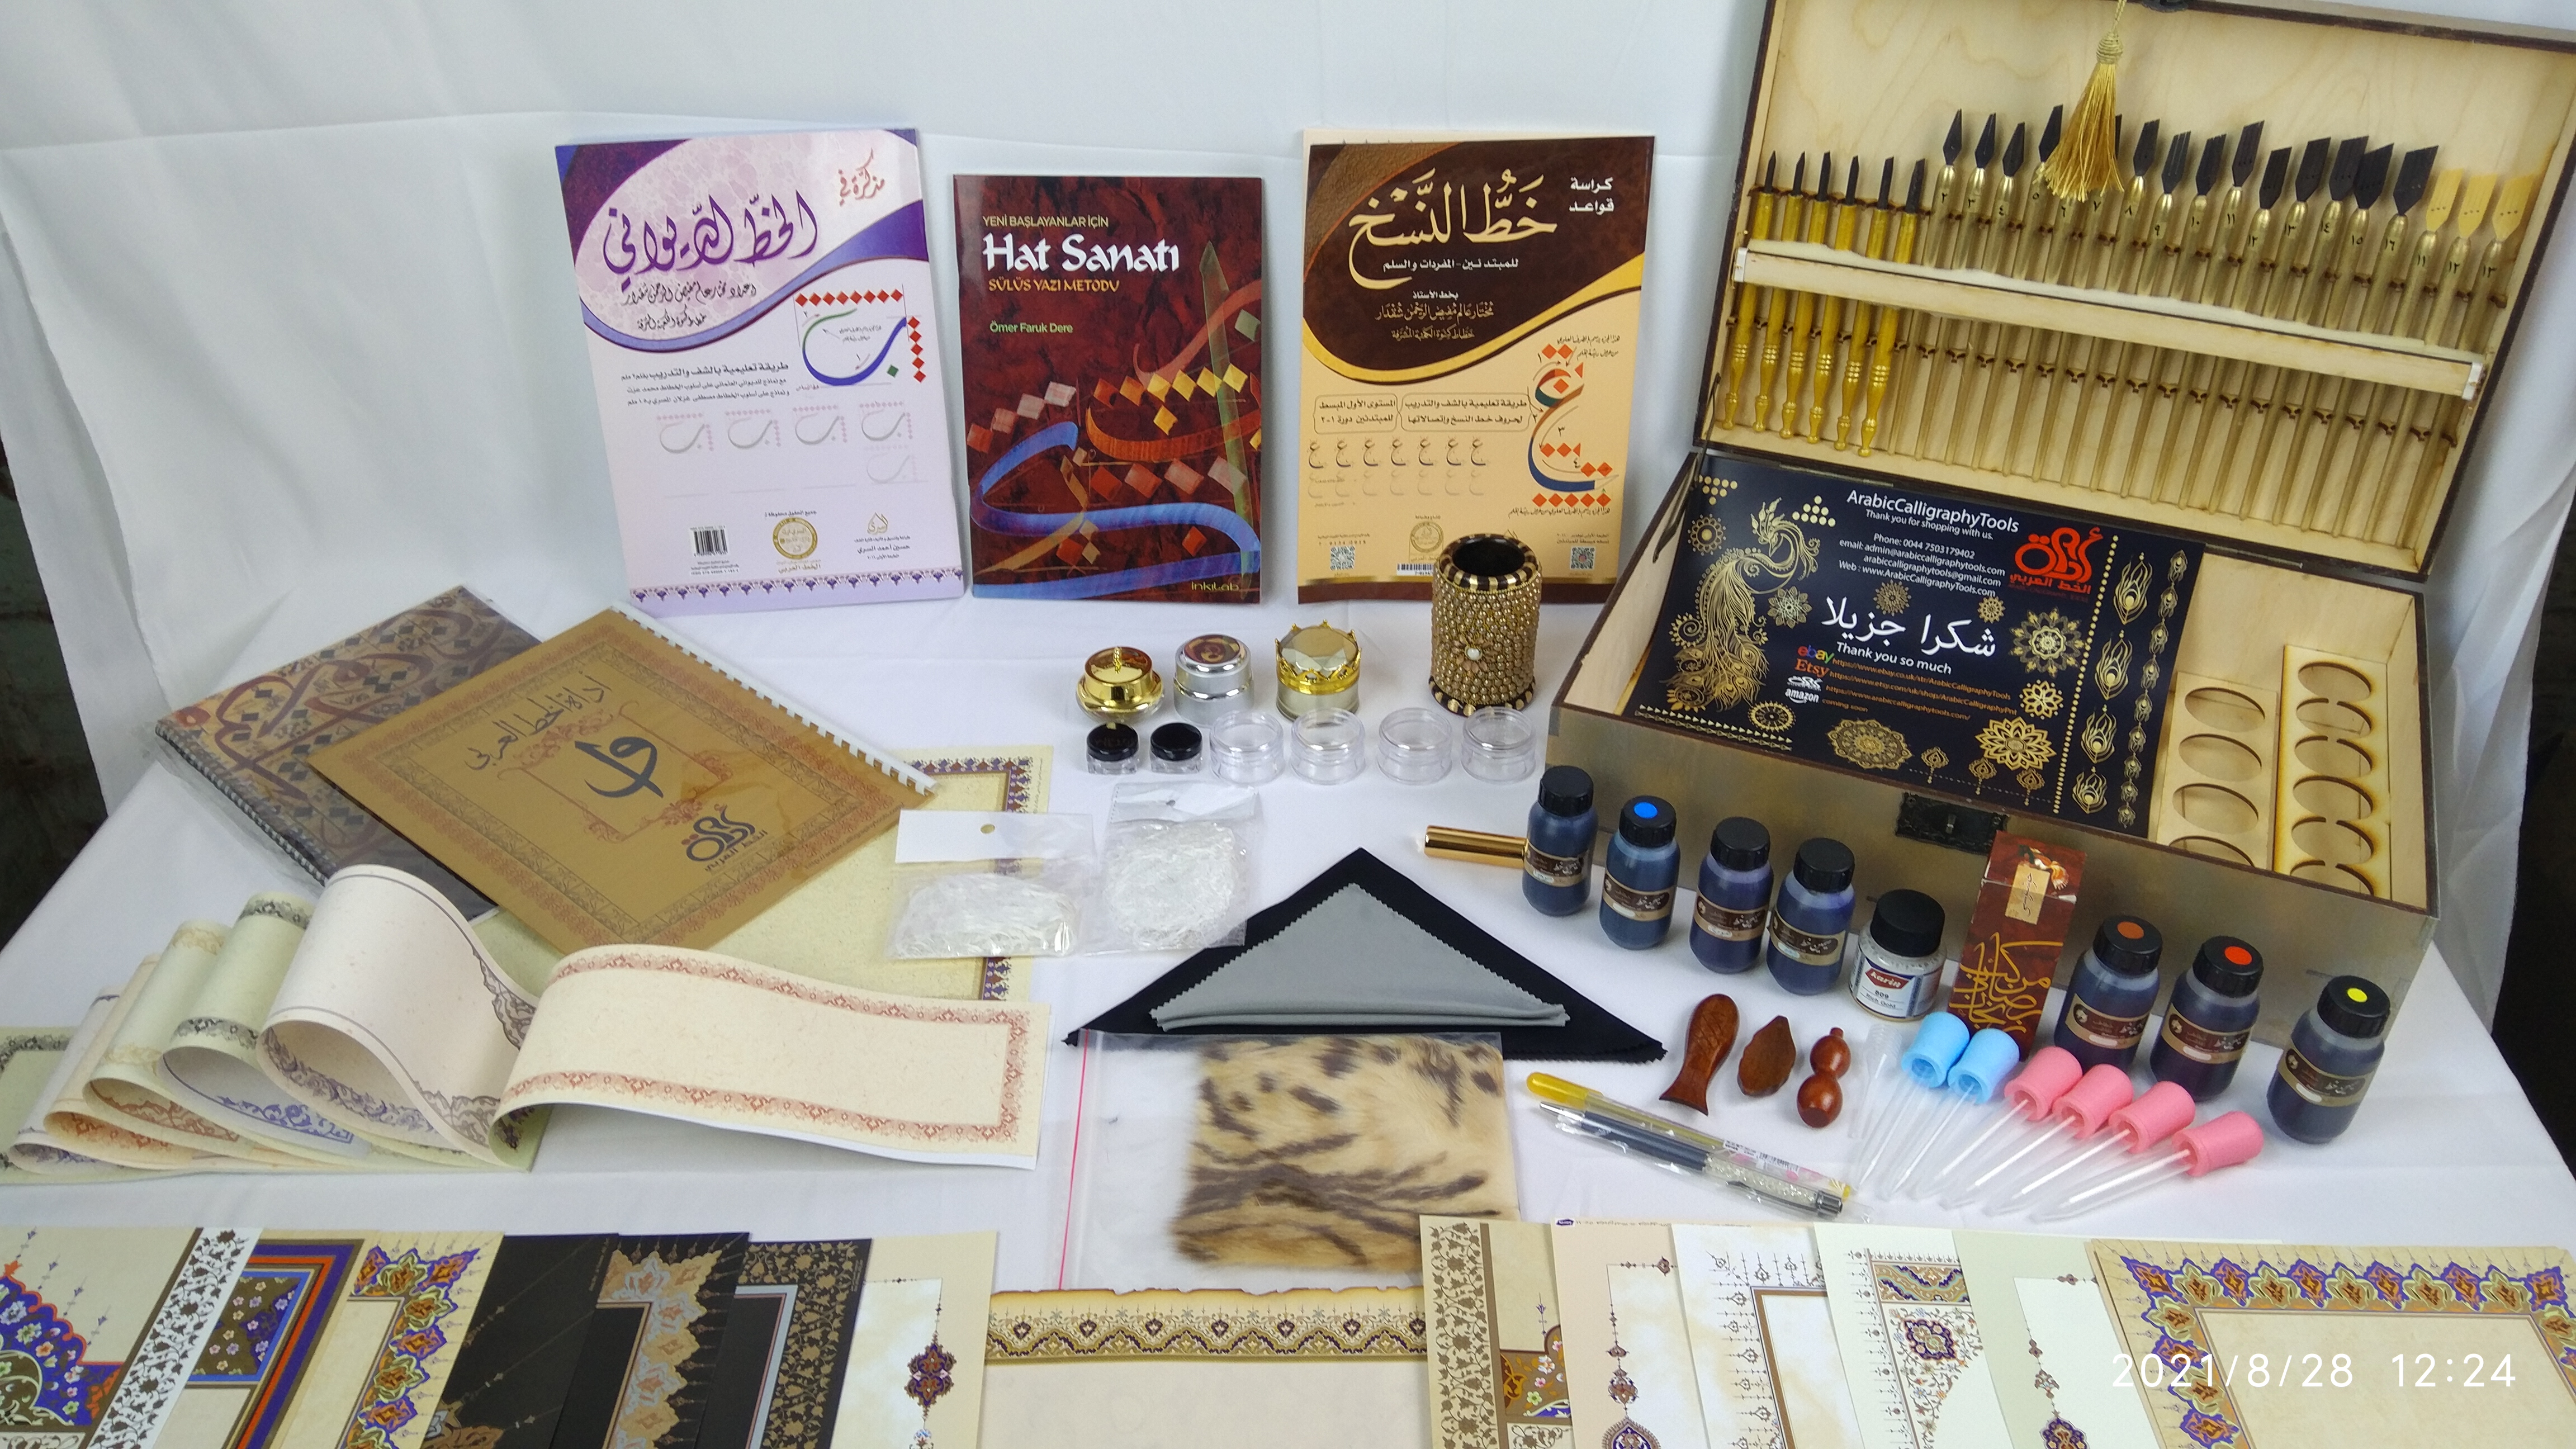 Arabic Calligraphy Set Qalams,Ink,Lika,Inkwell,Papers,Sulus Jali Script Book